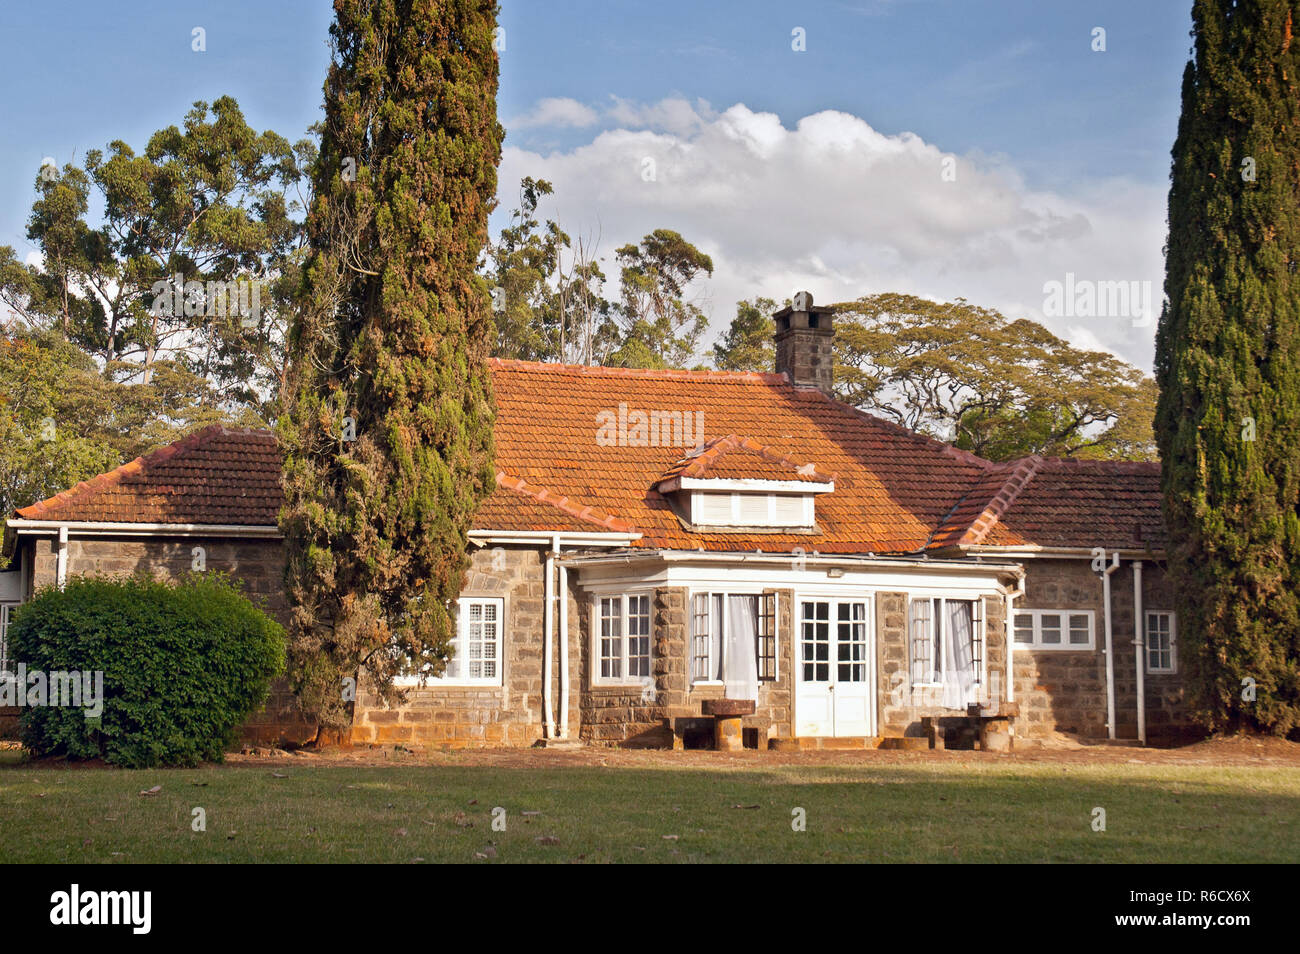 Museum Of Karen Blixen Blixen Was A Danish Author Best Known For Out Of Africa, Her Account Of Living In Kenya, Nairobi Stock Photo